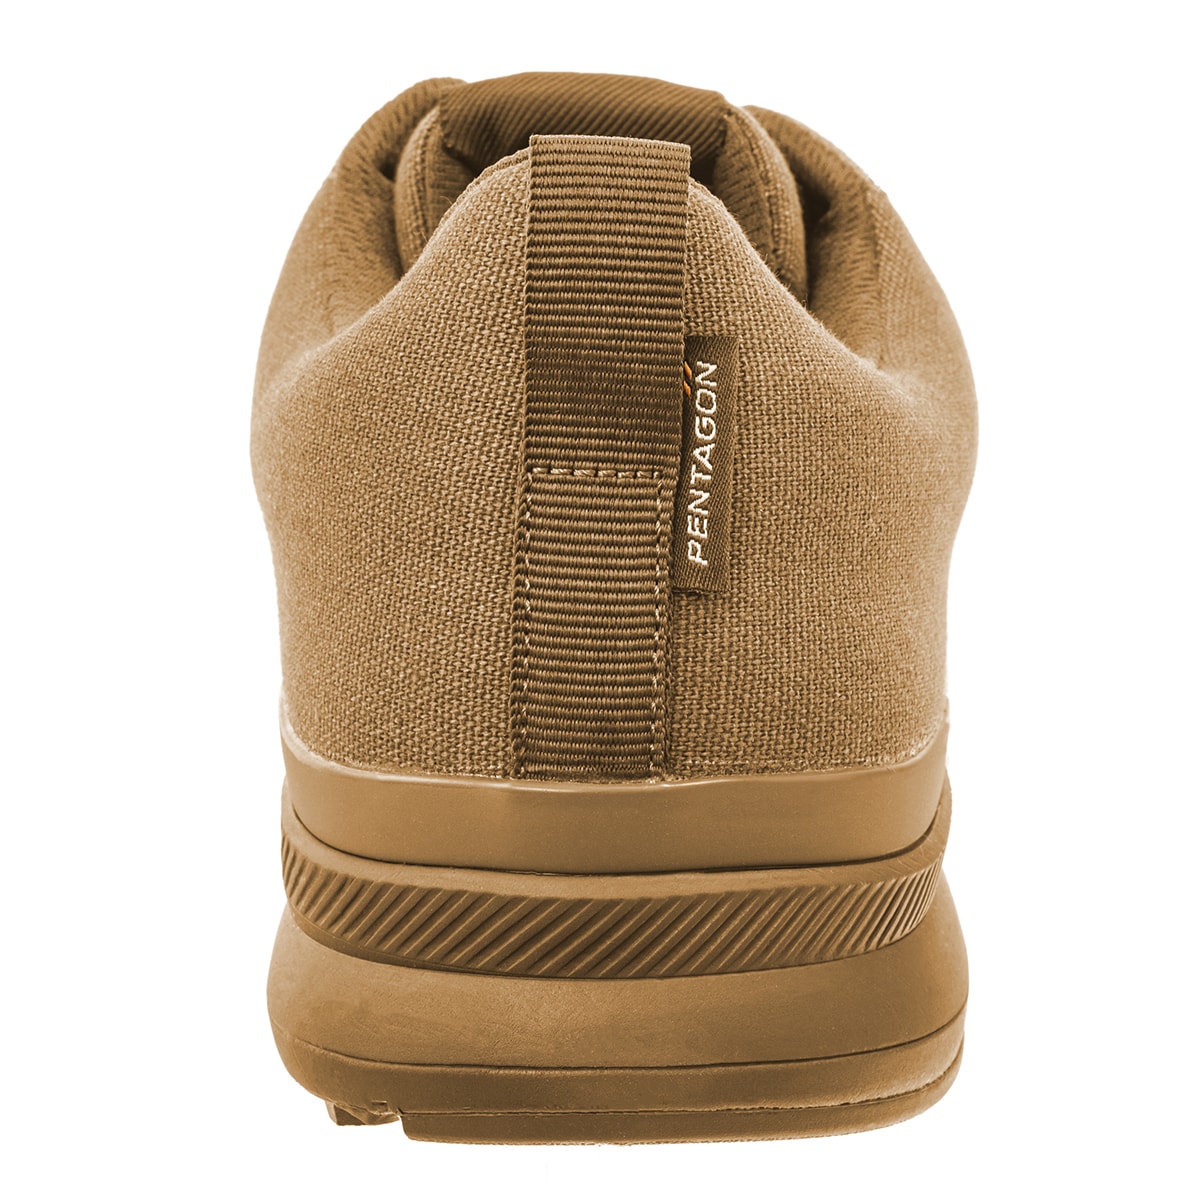 Buty Pentagon Hybrid Tactical Shoes - Coyote